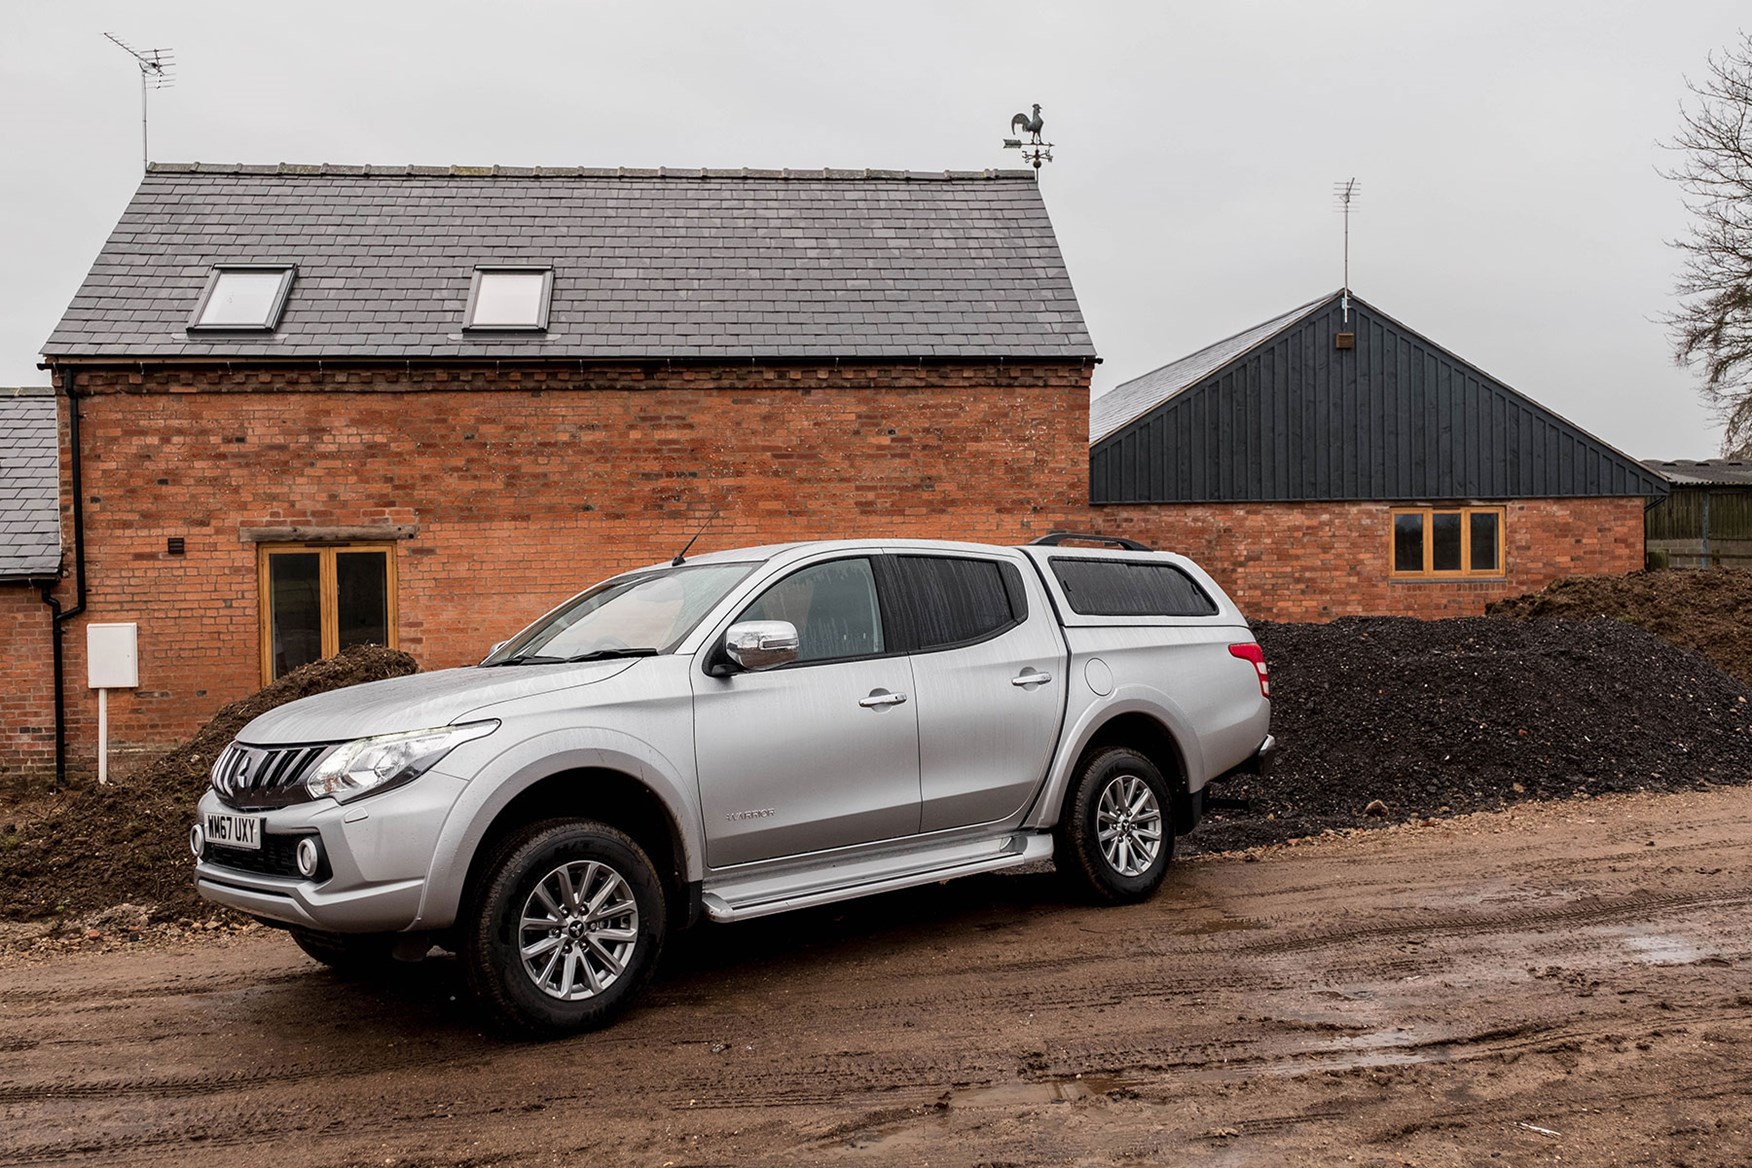 Mistubishi L200 Warrior 2018 review - side view, silver, rain, parked in front of farm building